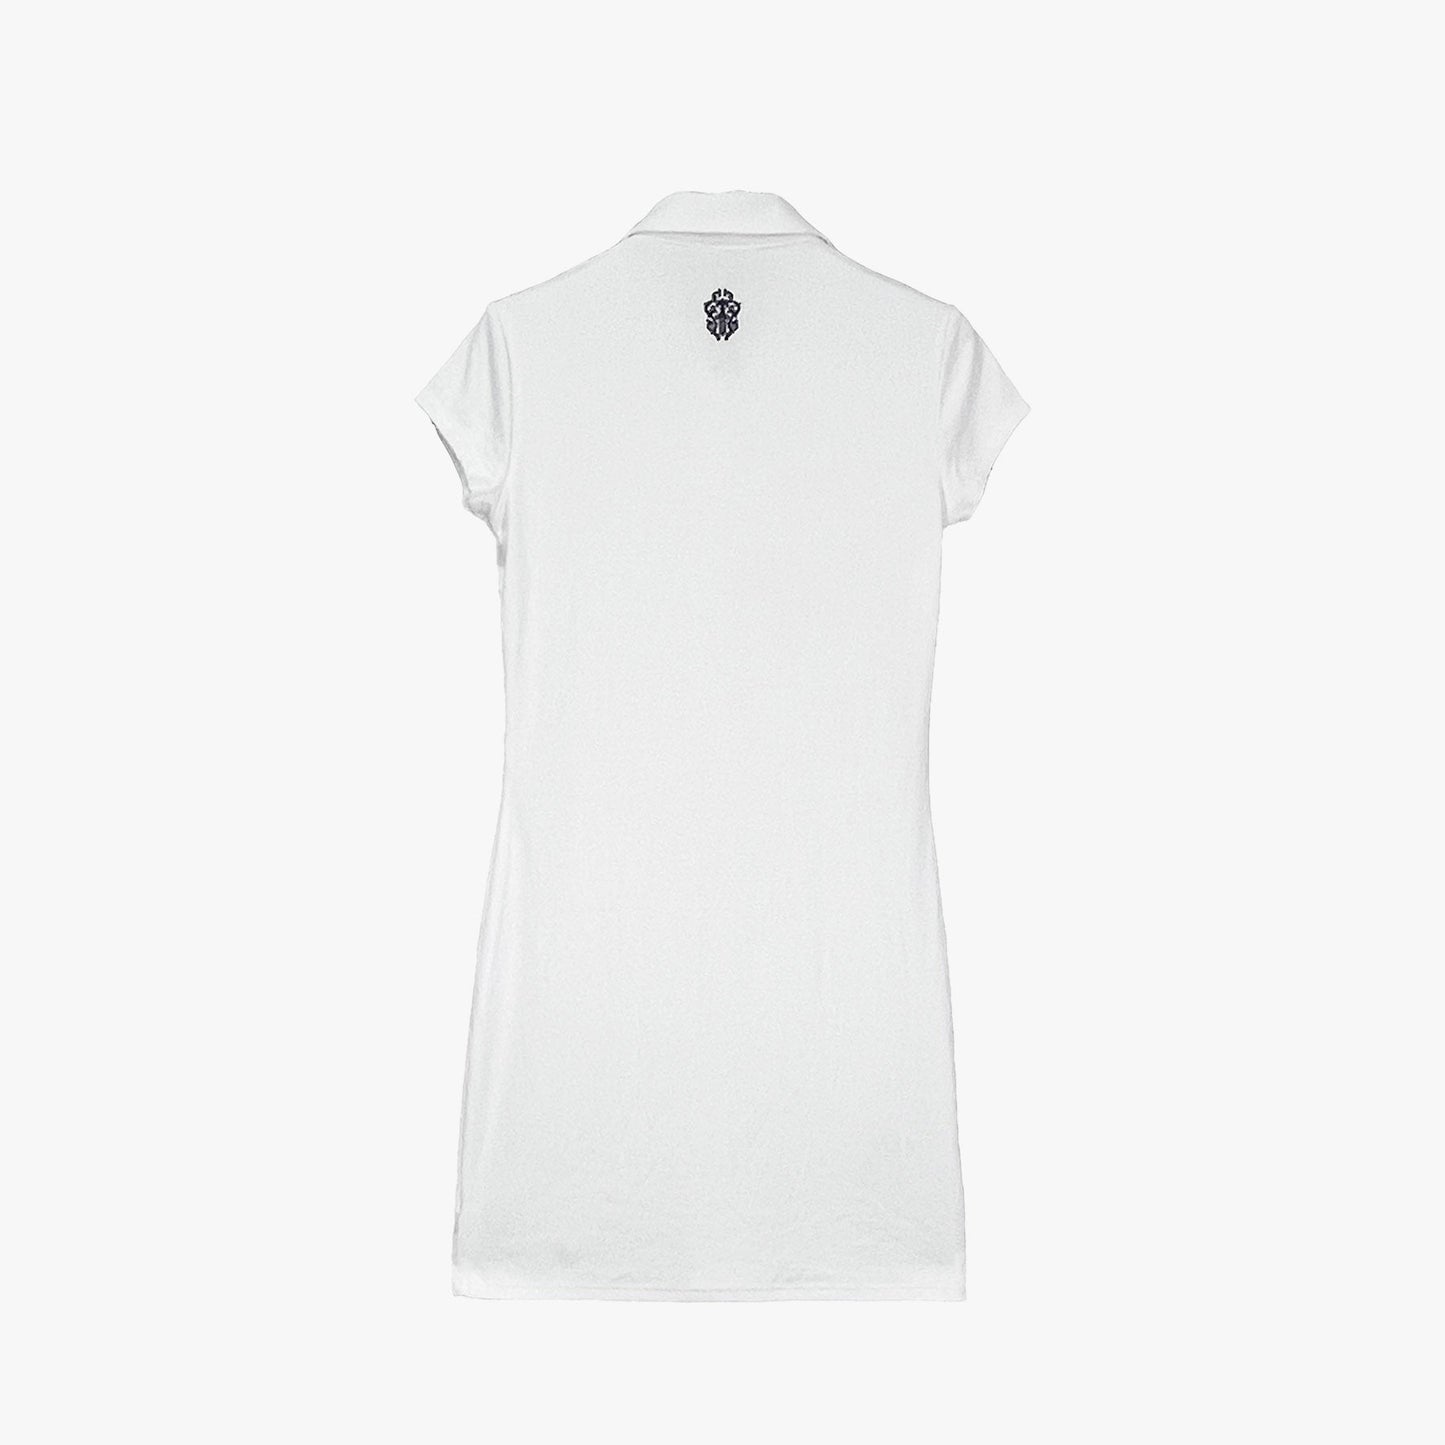 Chrome Hearts White Slim Dress with Silver Buttons - SHENGLI ROAD MARKET